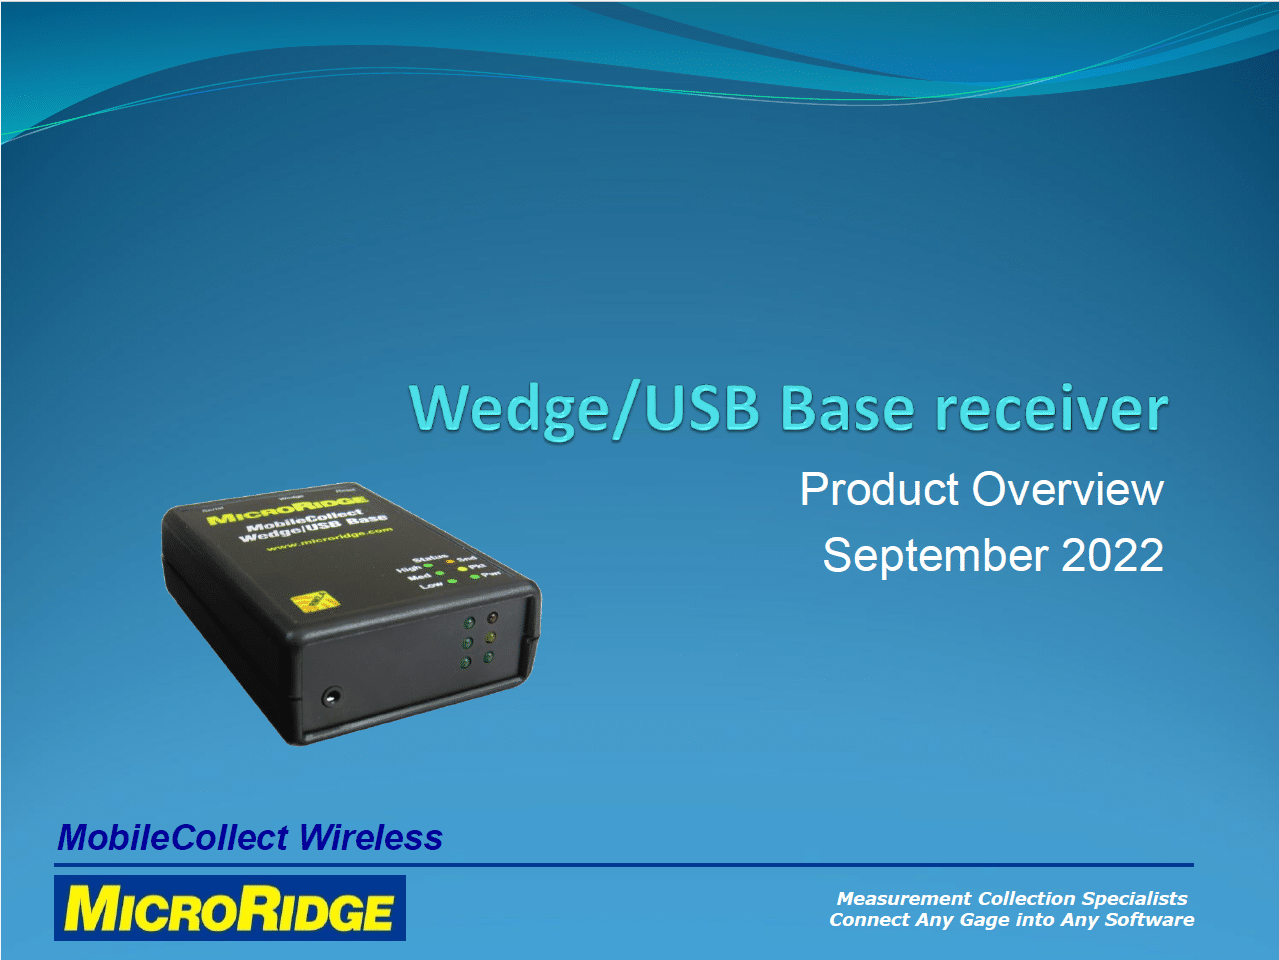 Wedge/USB Base Overview